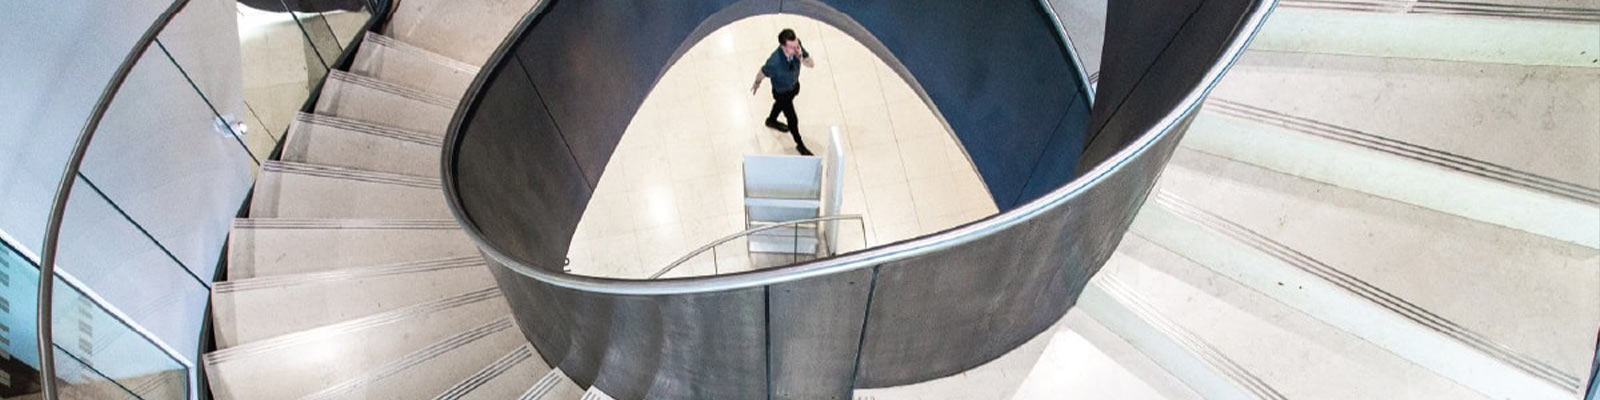 Man walking up the spiral staircase